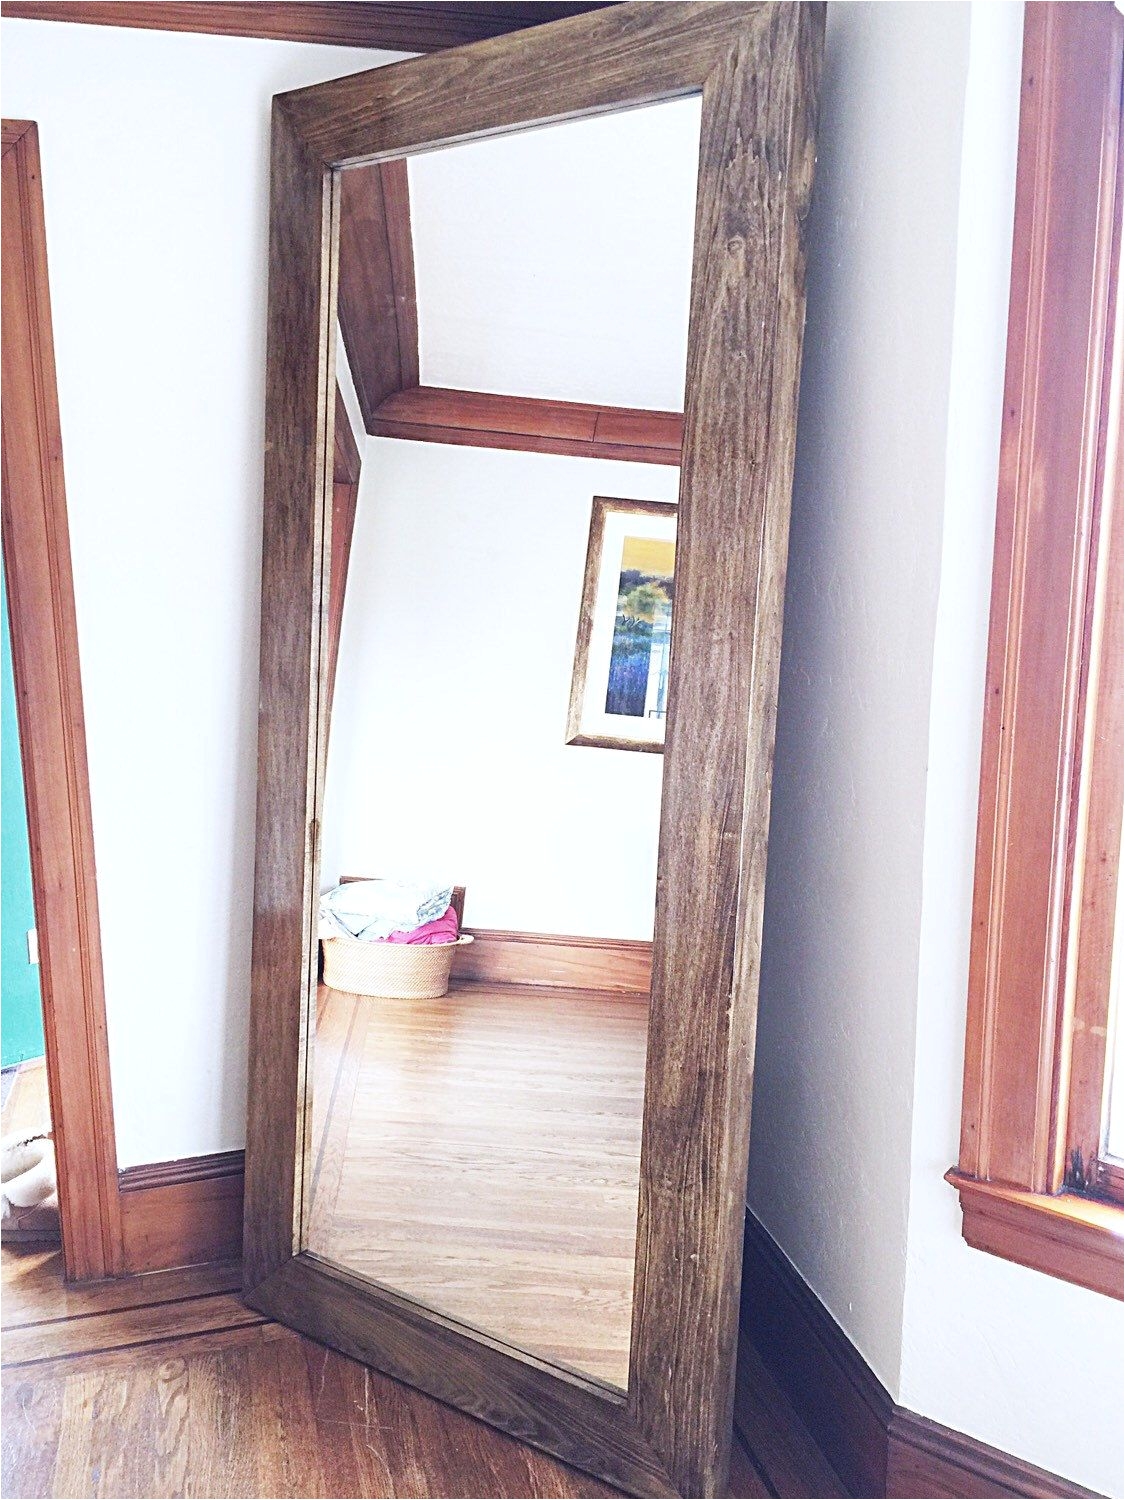 x large wooden frame floor mirror by silverstems on etsy https www etsy com listing 269180940 x large wooden frame floor mirror